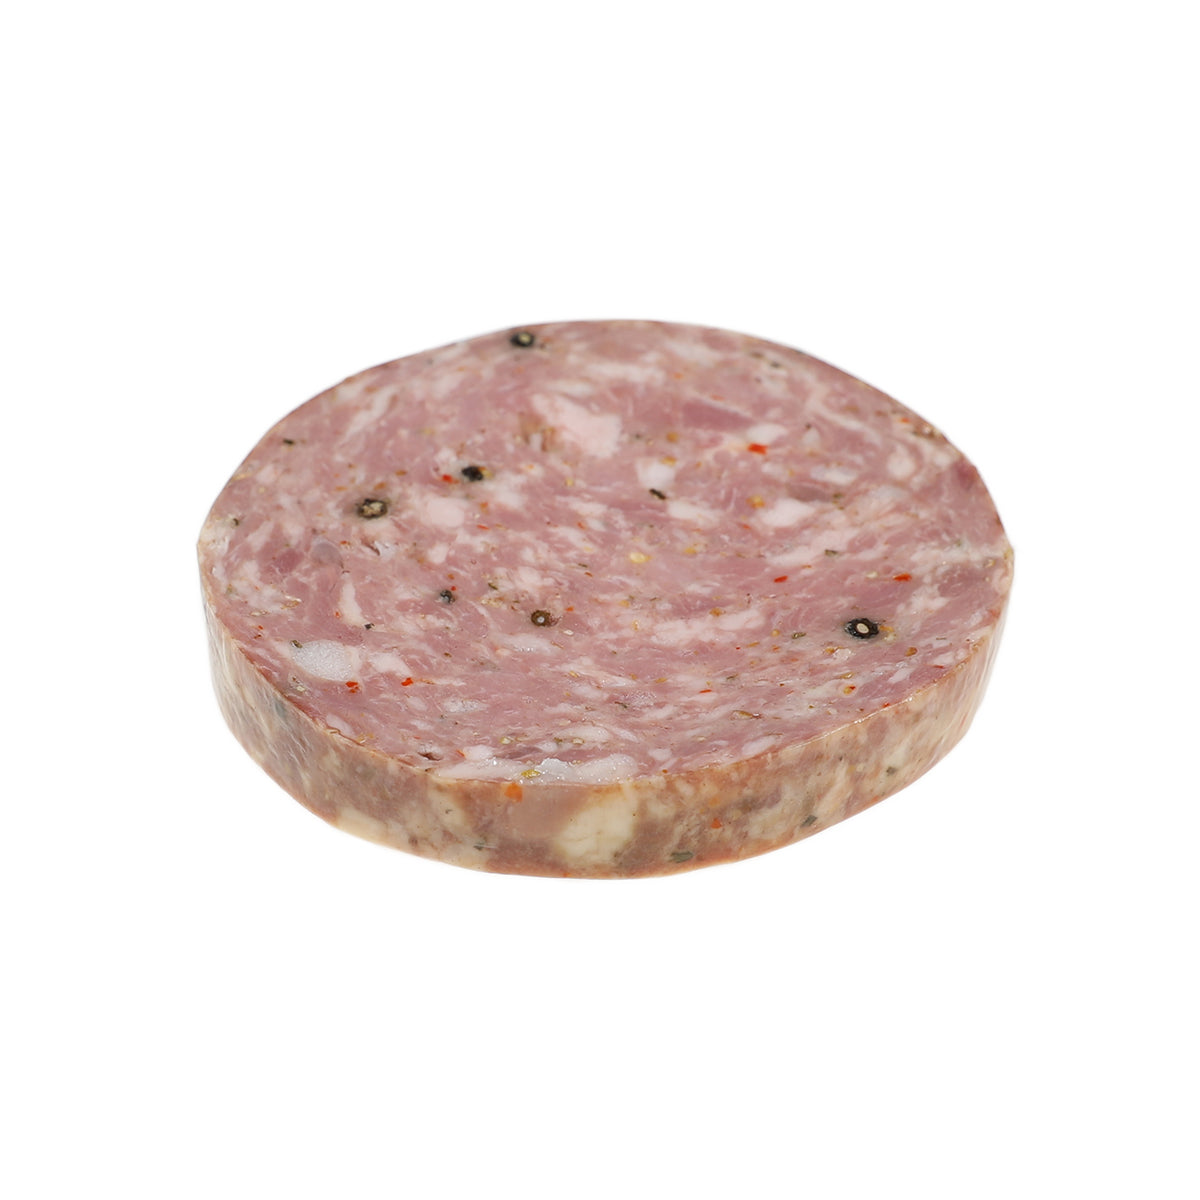 Murray'S Cheese Olympia Provisions Salami Cotto